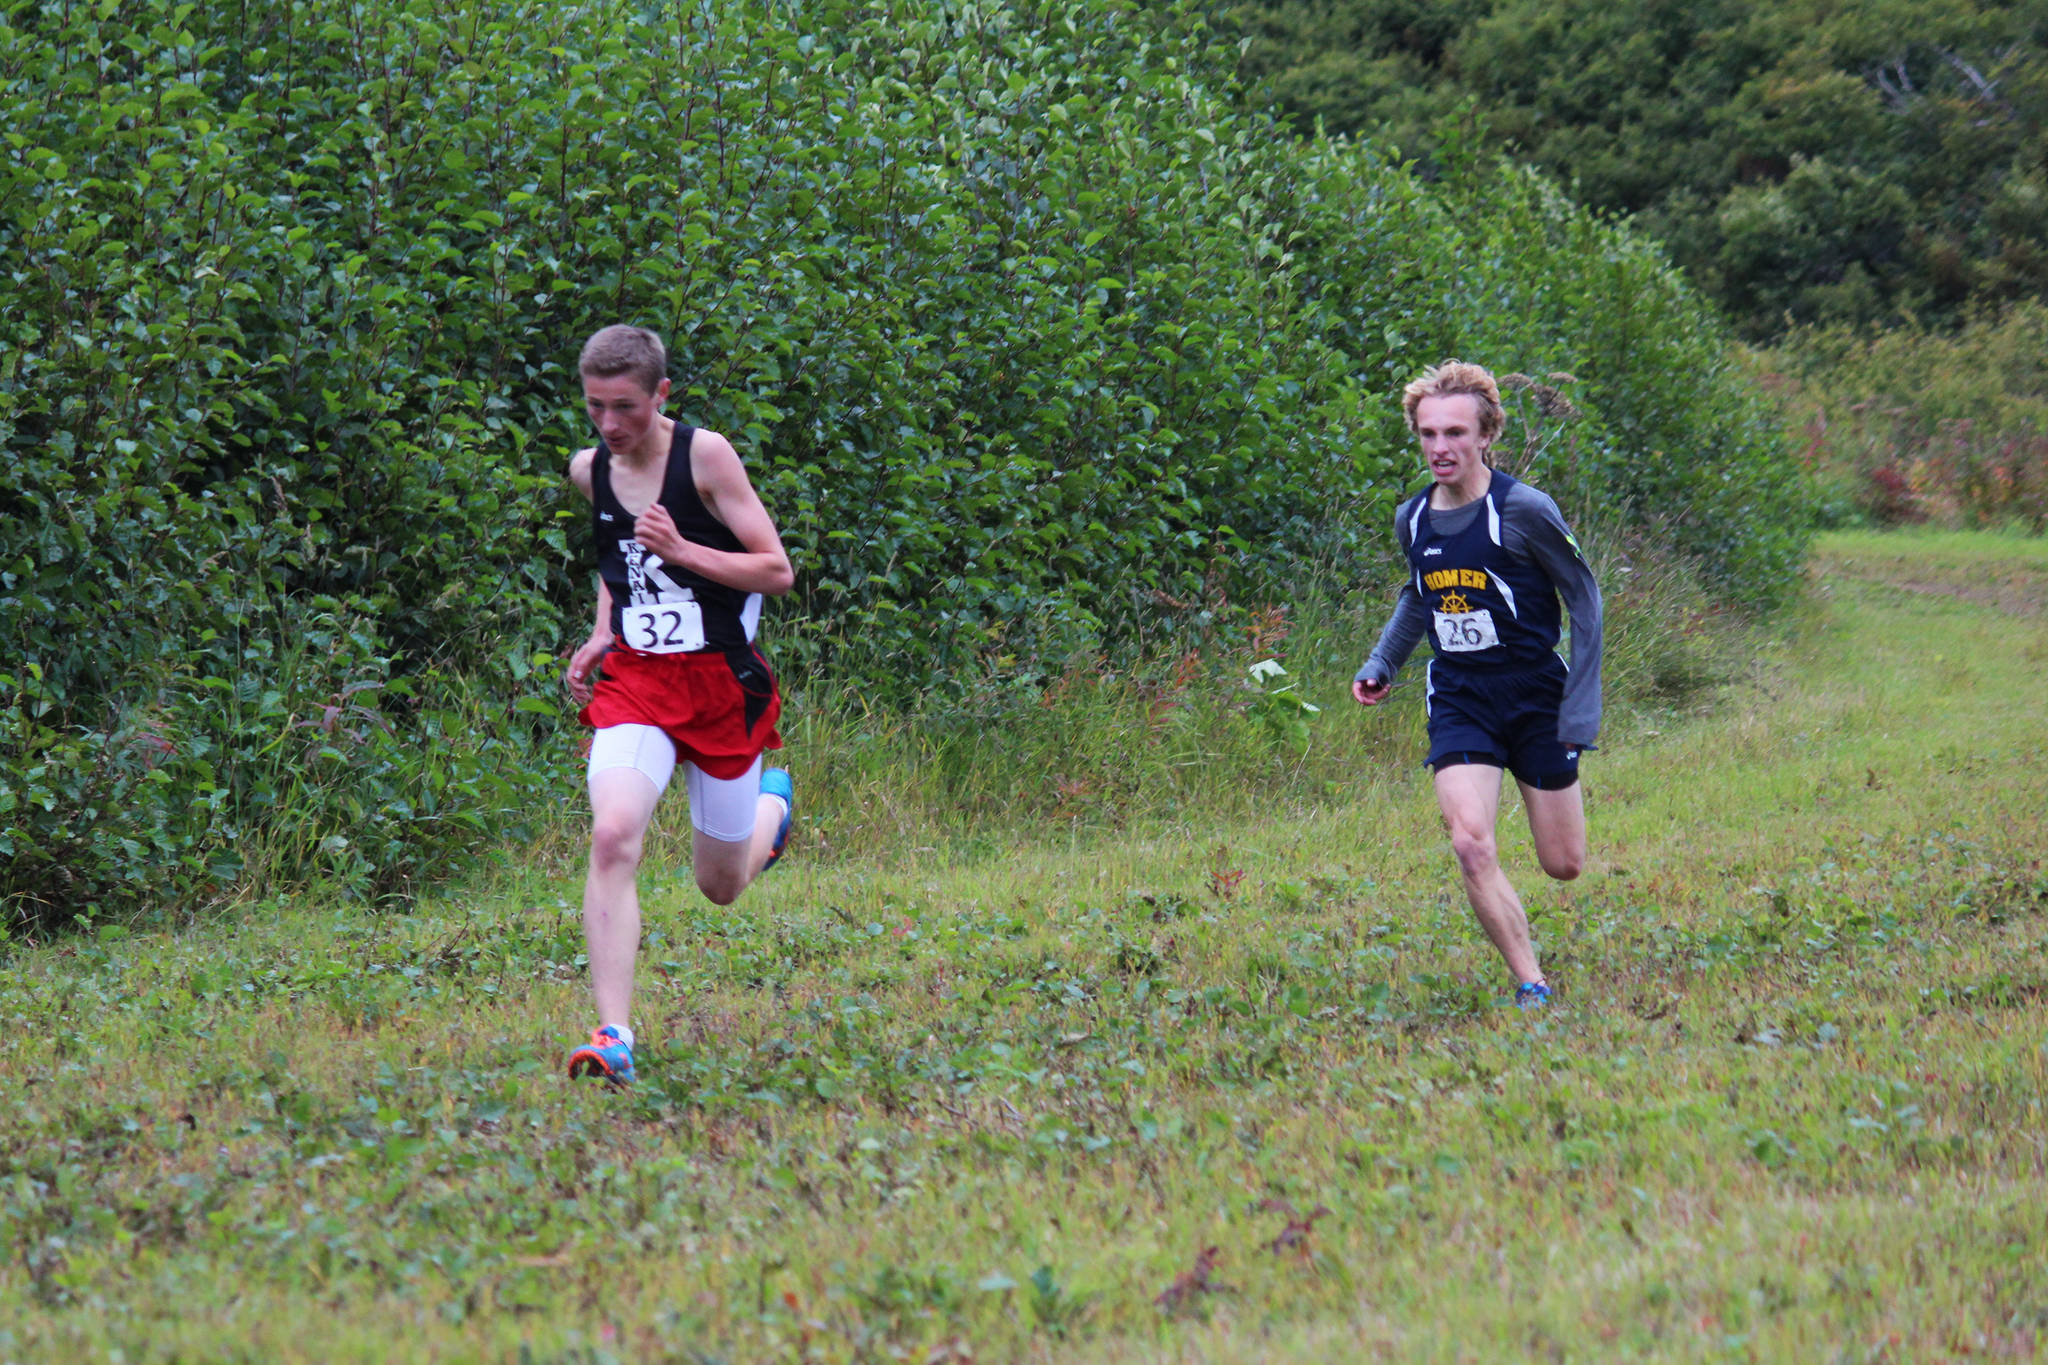 Kenai Central High School runner Maison Dunham beats Homer’s Jacob Davis to the finish line of the varsity boys race at the Kenai Peninsula Borough Cross Country Running Championships on Tuesday, Sept. 12, 2017 at the Lookout Mountain Trails near Homer, Alaska. Dunham took first for the varsity boys and Davis came in second. (Photo by Megan Pacer/Homer News)